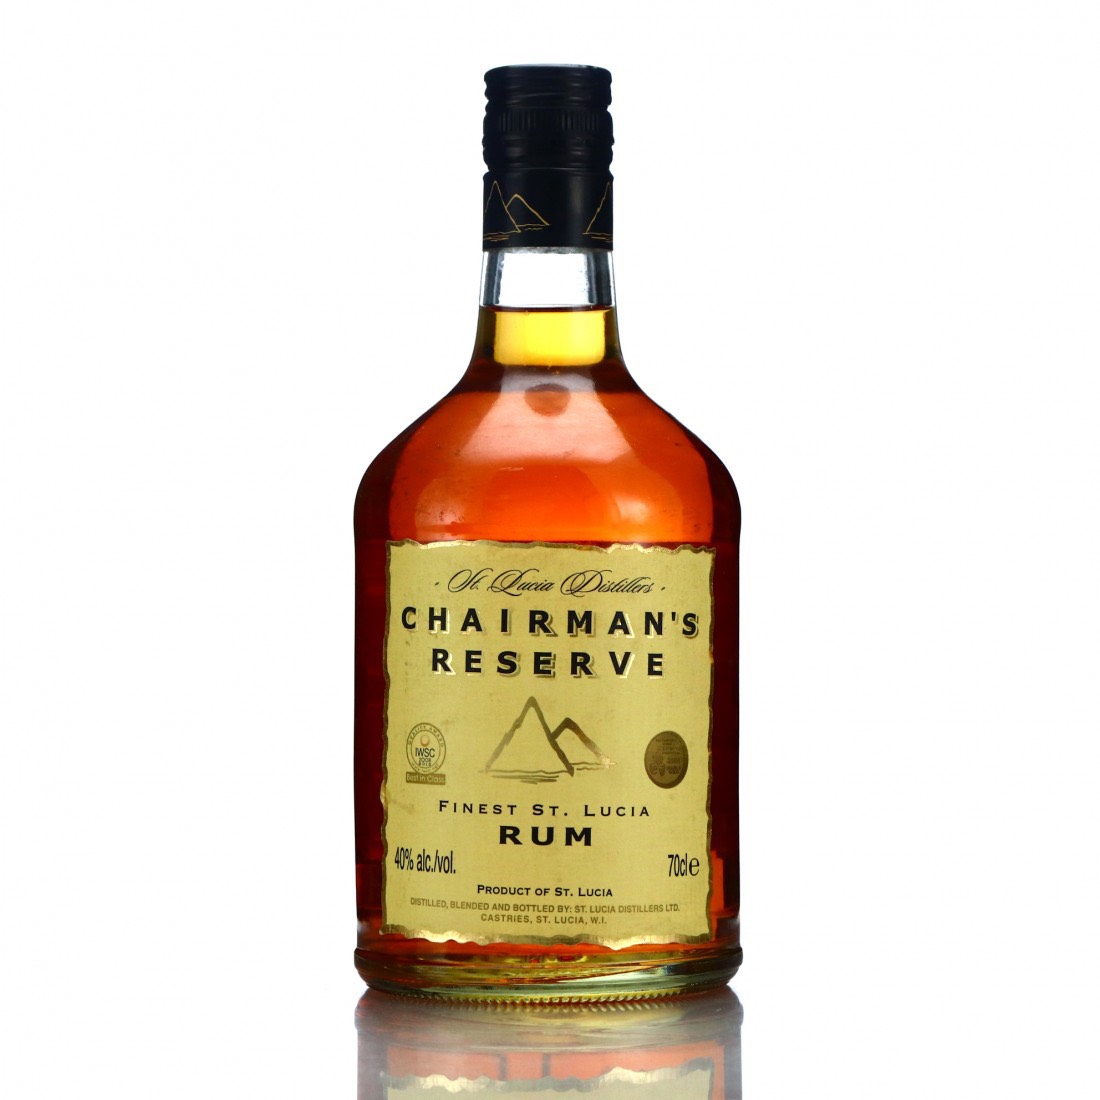 Bottle image of Chairman‘s Reserve Finest St. Lucia Rum